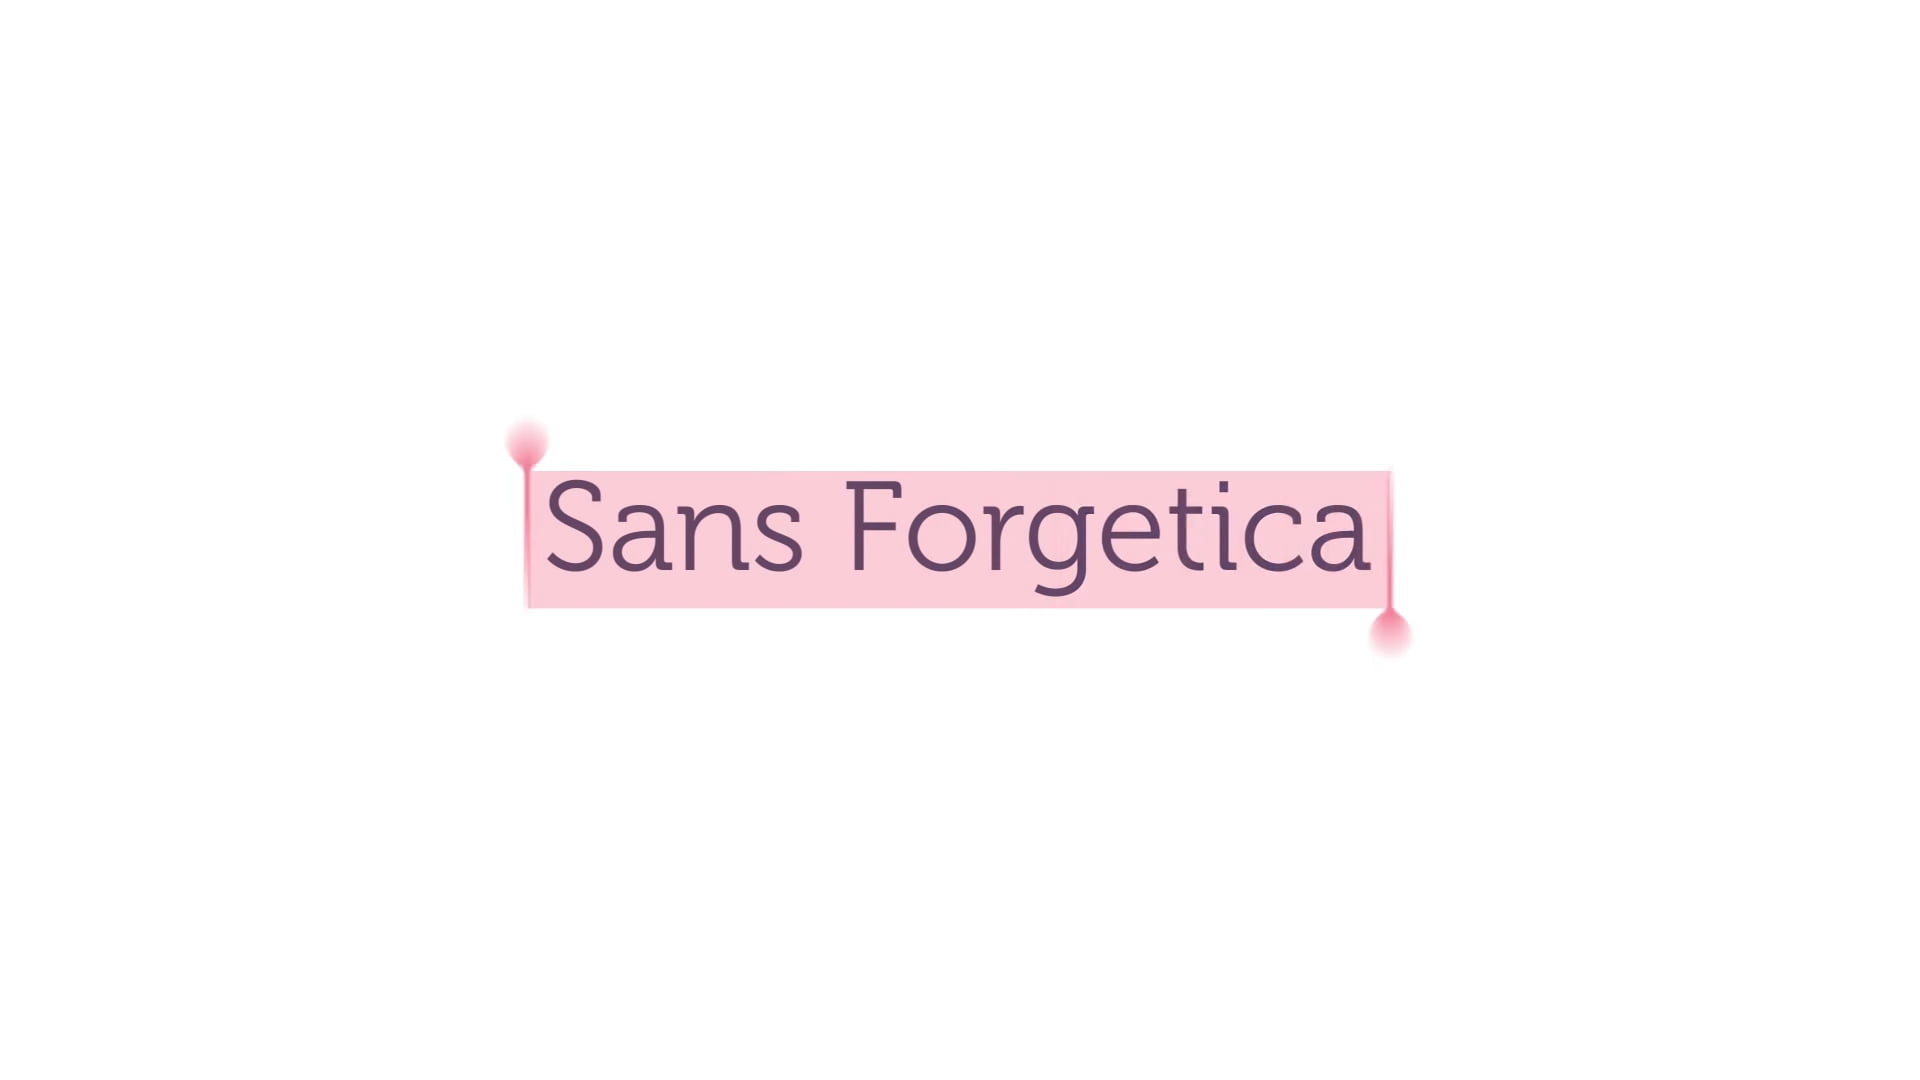 Font 'Sans Forgetica' Is Made To Help You Memorize Things